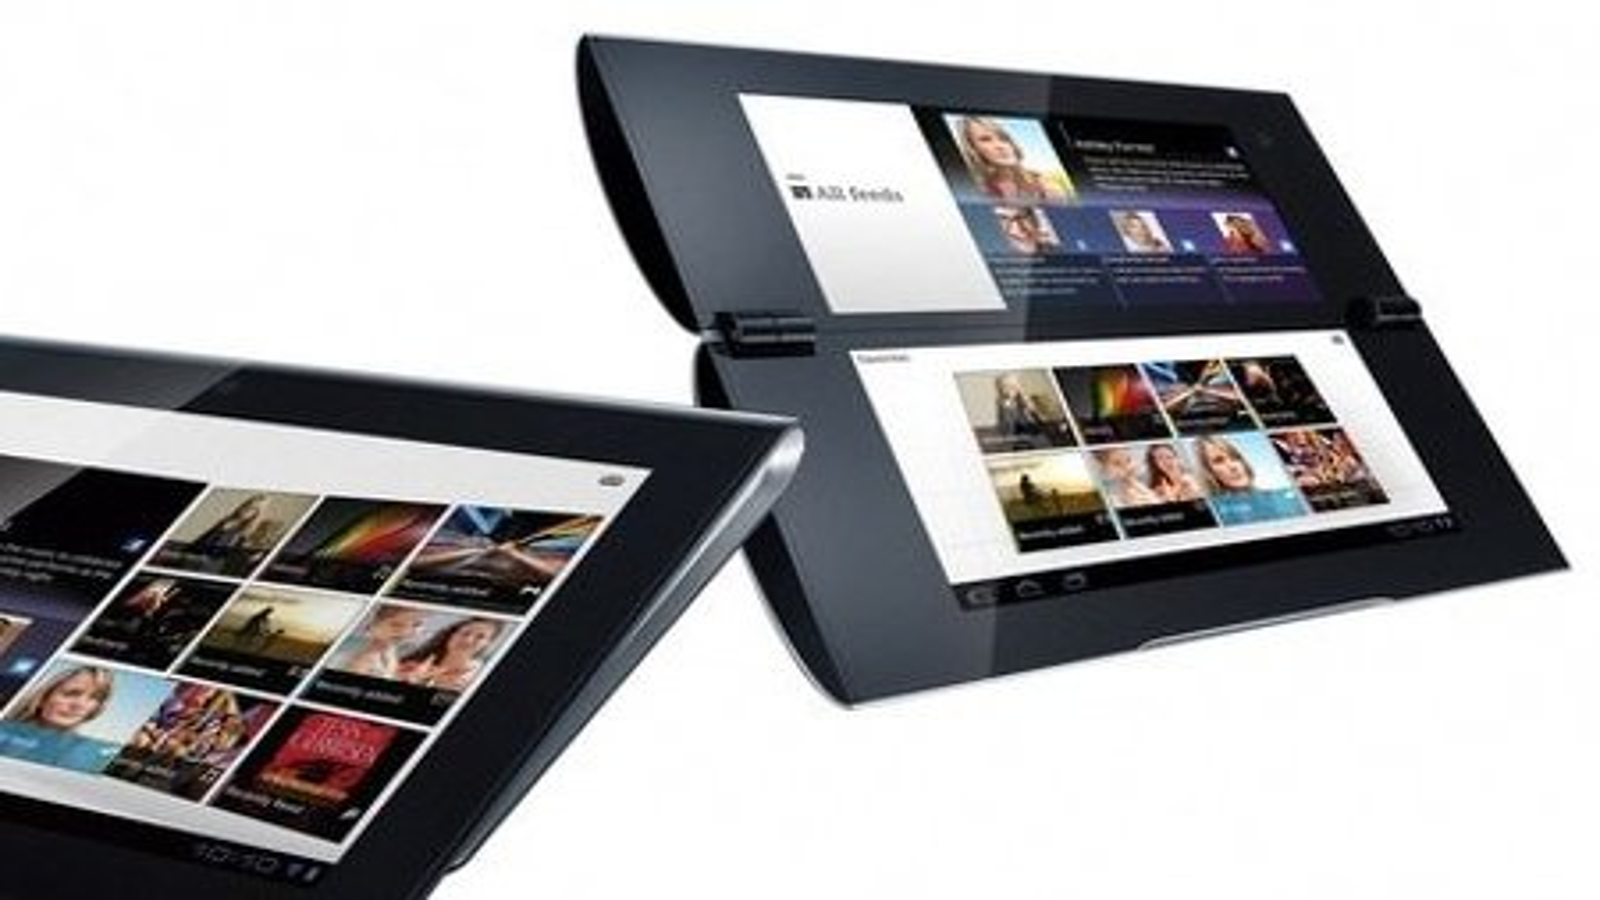 Sony's giant, $700 e-paper tablet is a great example of Weird Sony